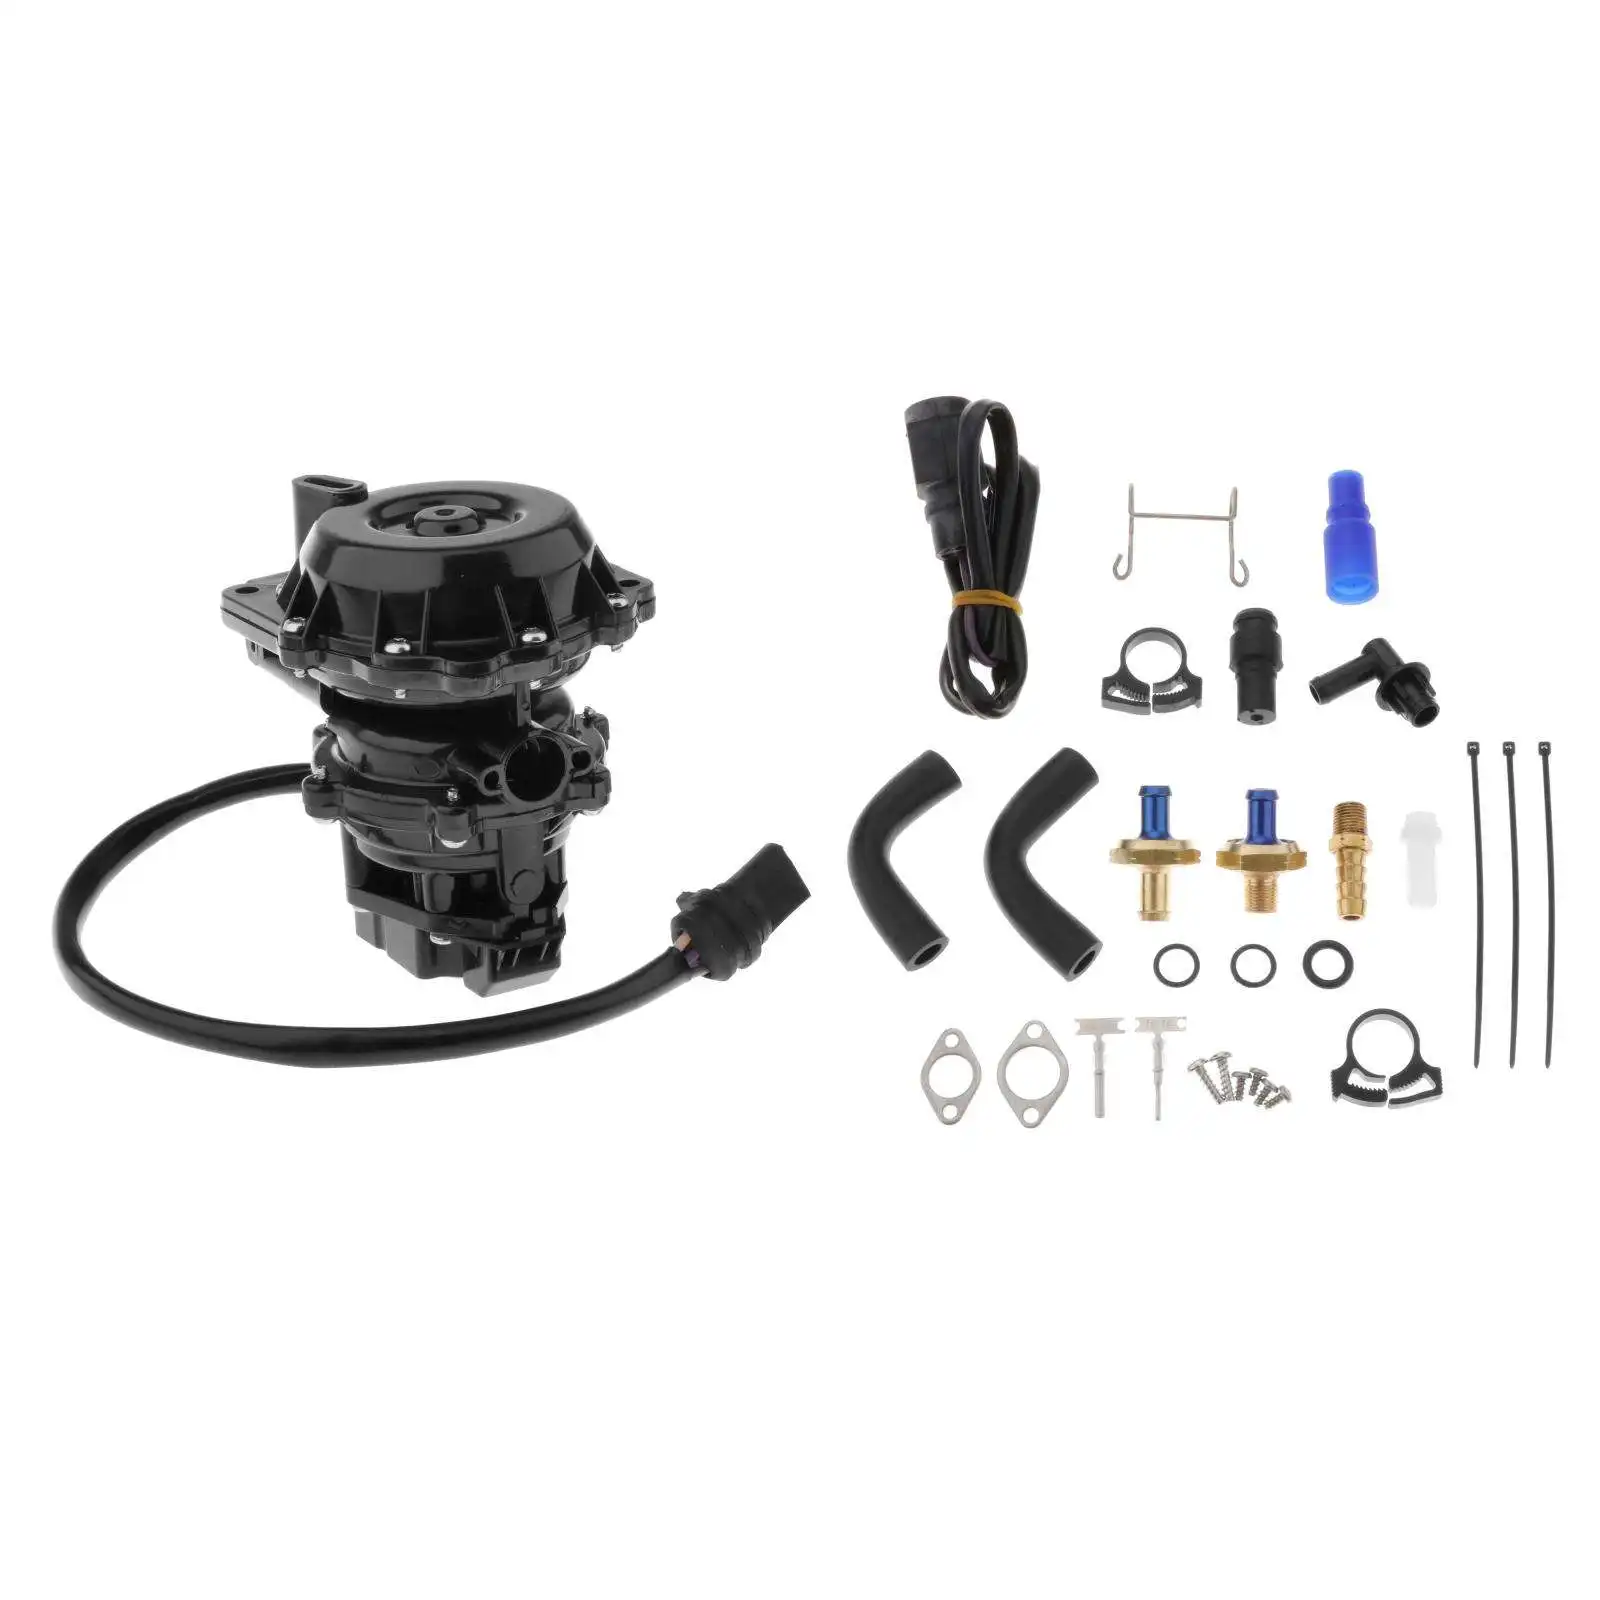 0175163, 0174879, 0174619 VRO Fuel Oil Pump with Kits Accessories for Johnson Evinrude Outboard